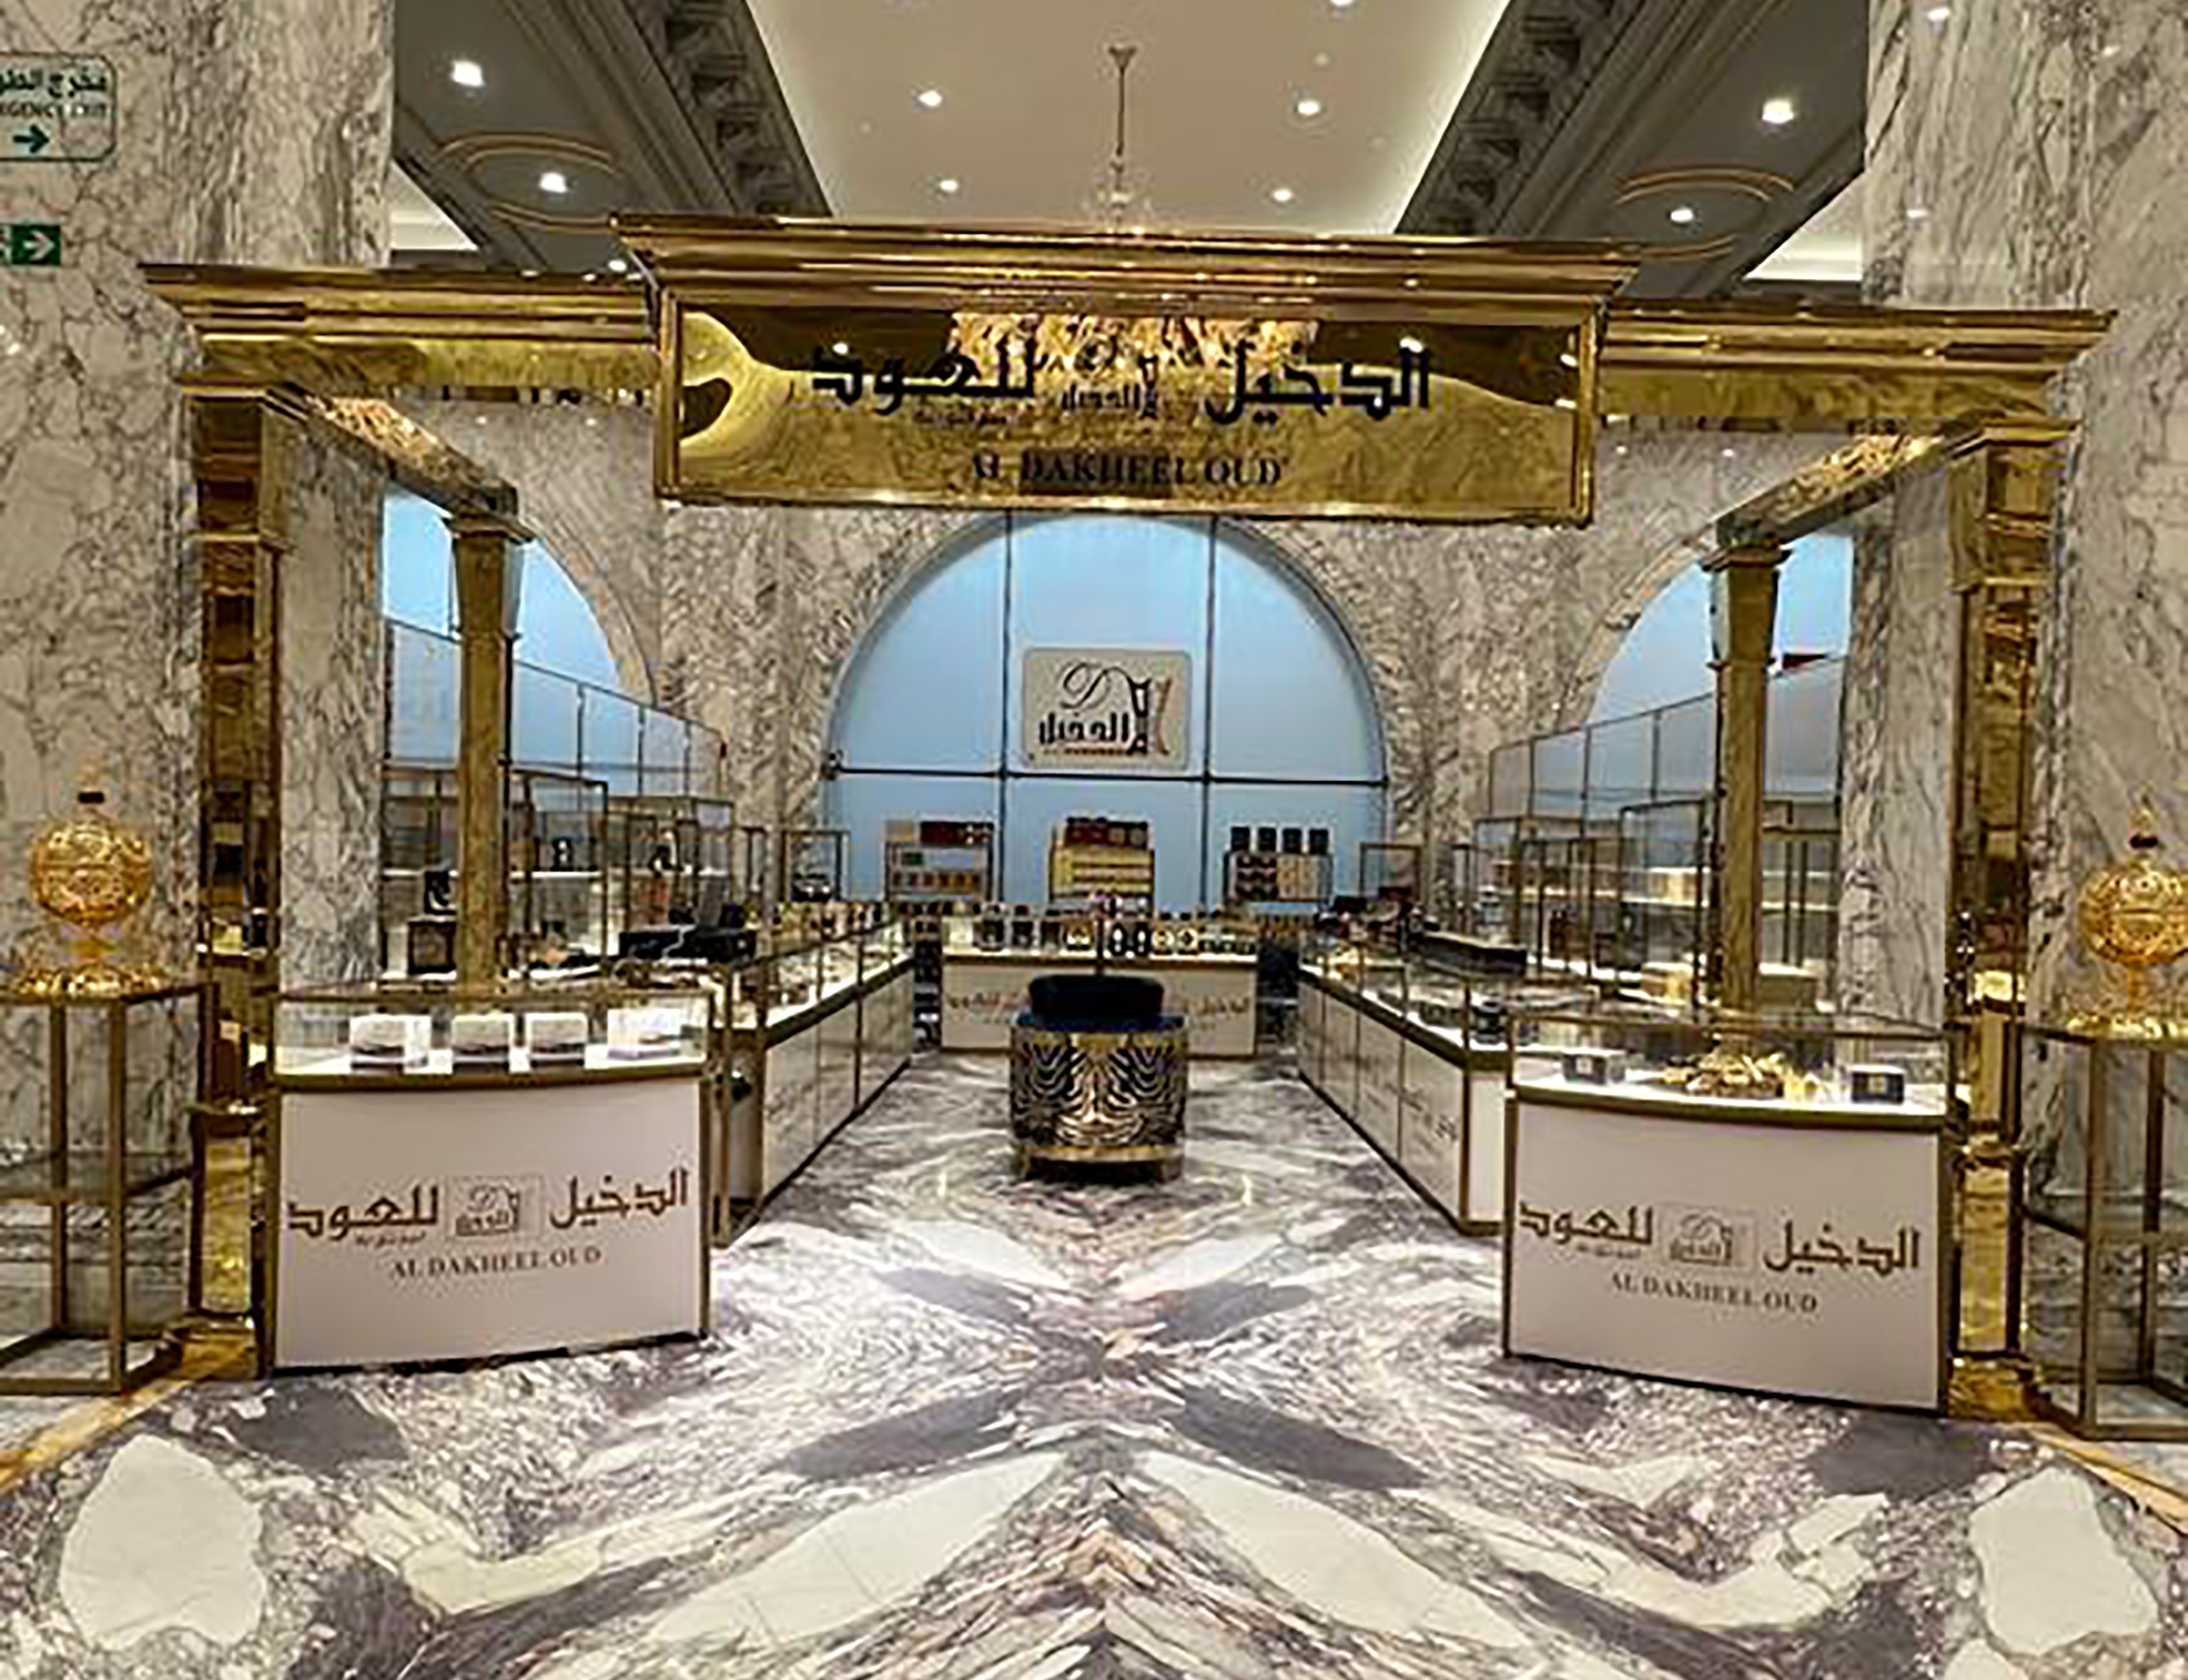 Aldakheel Oud participates in the largest perfume trade show in Doha